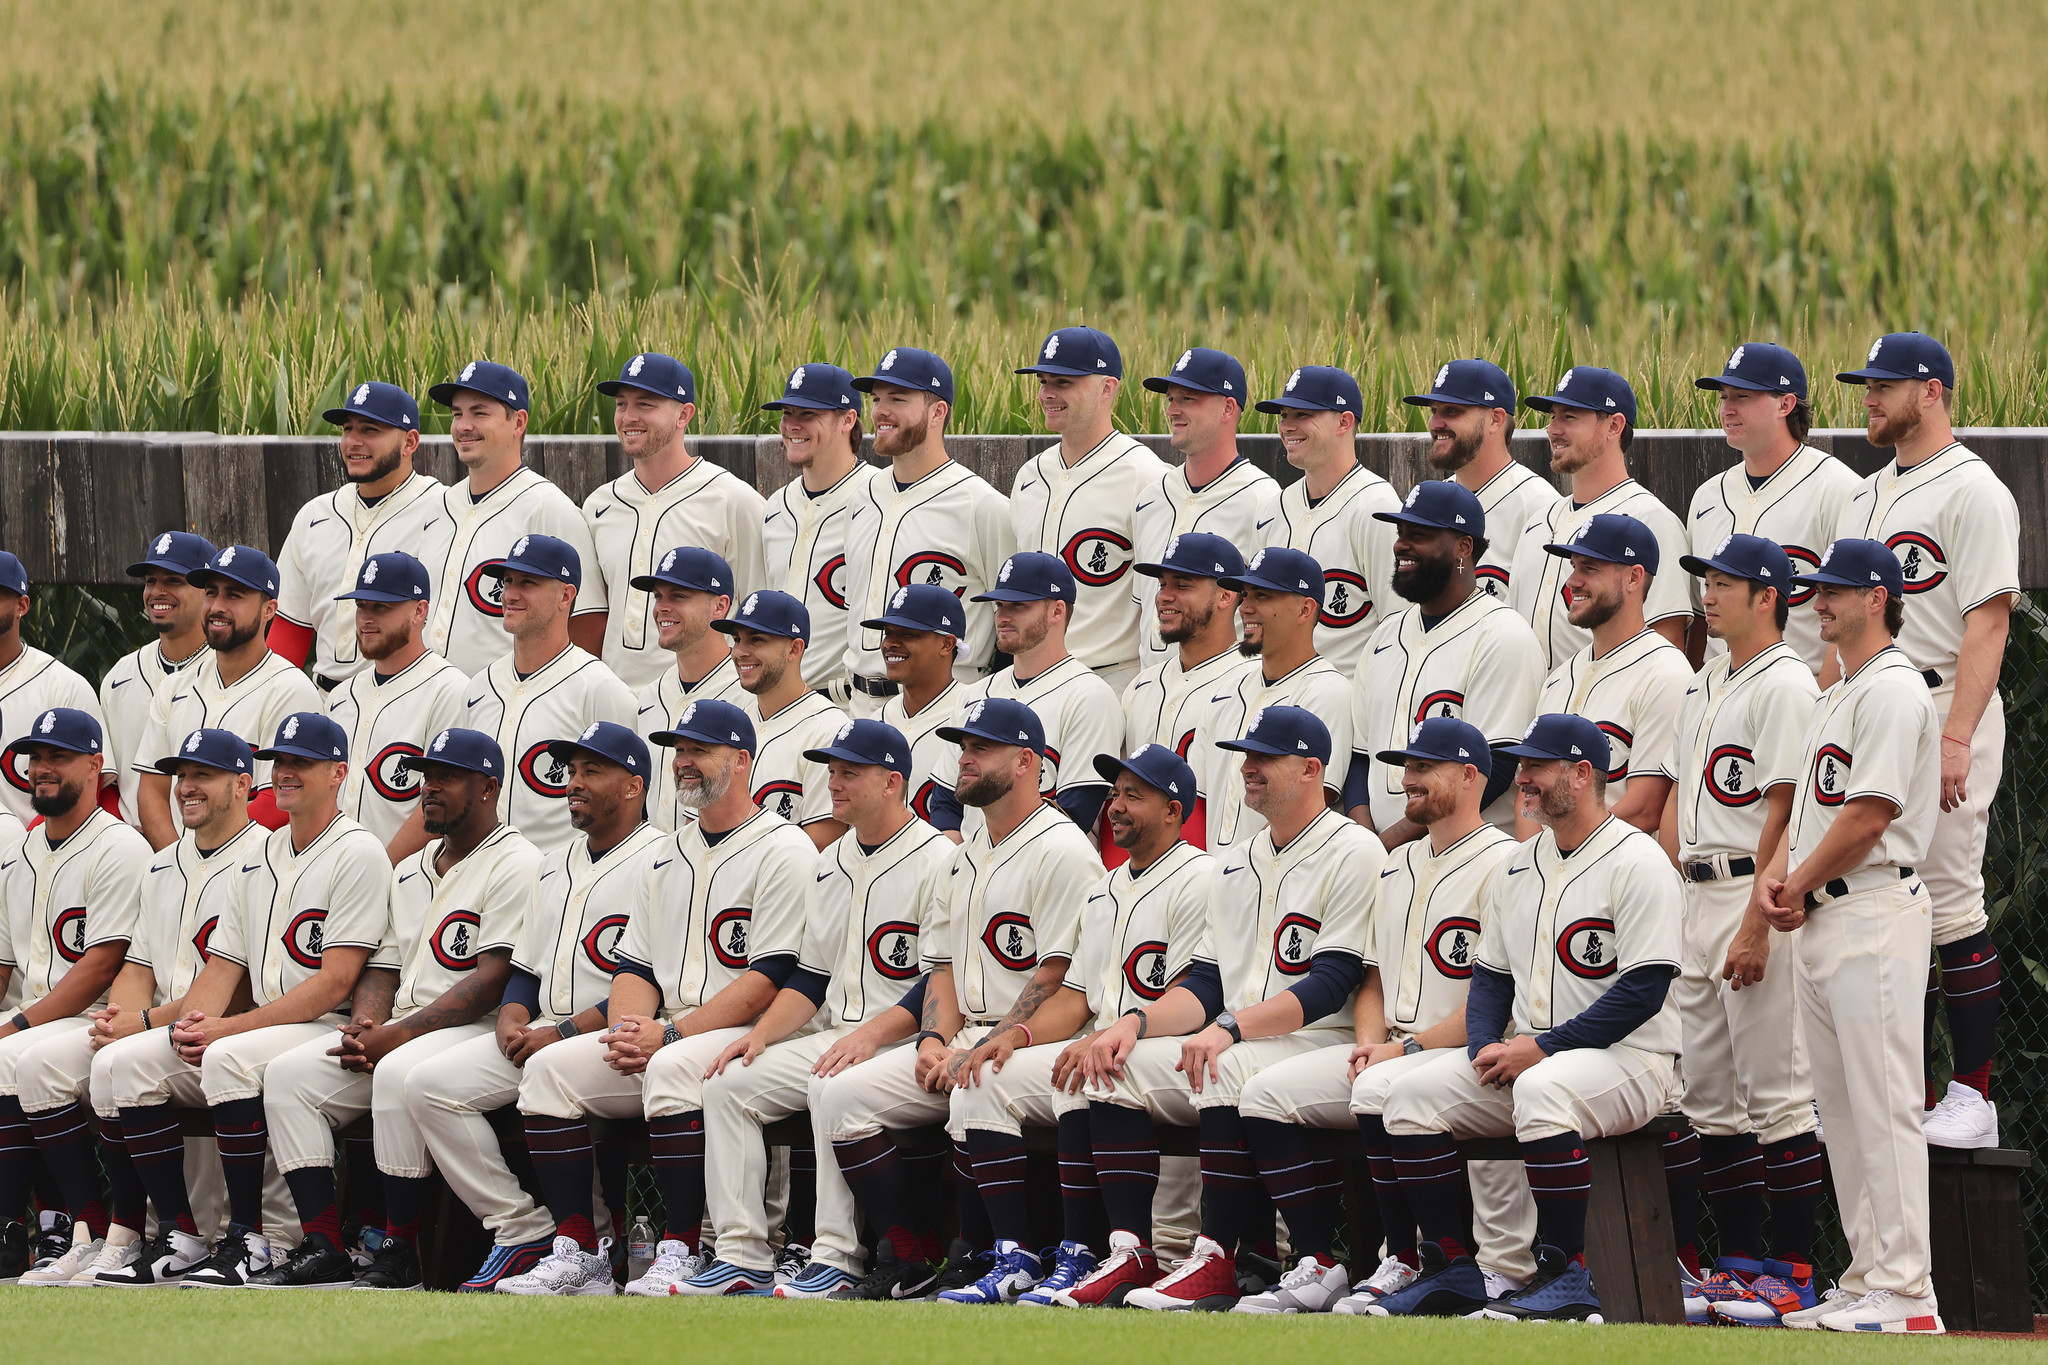 Chicago Cubs players at the Field of Dreams game focus on fatherhood